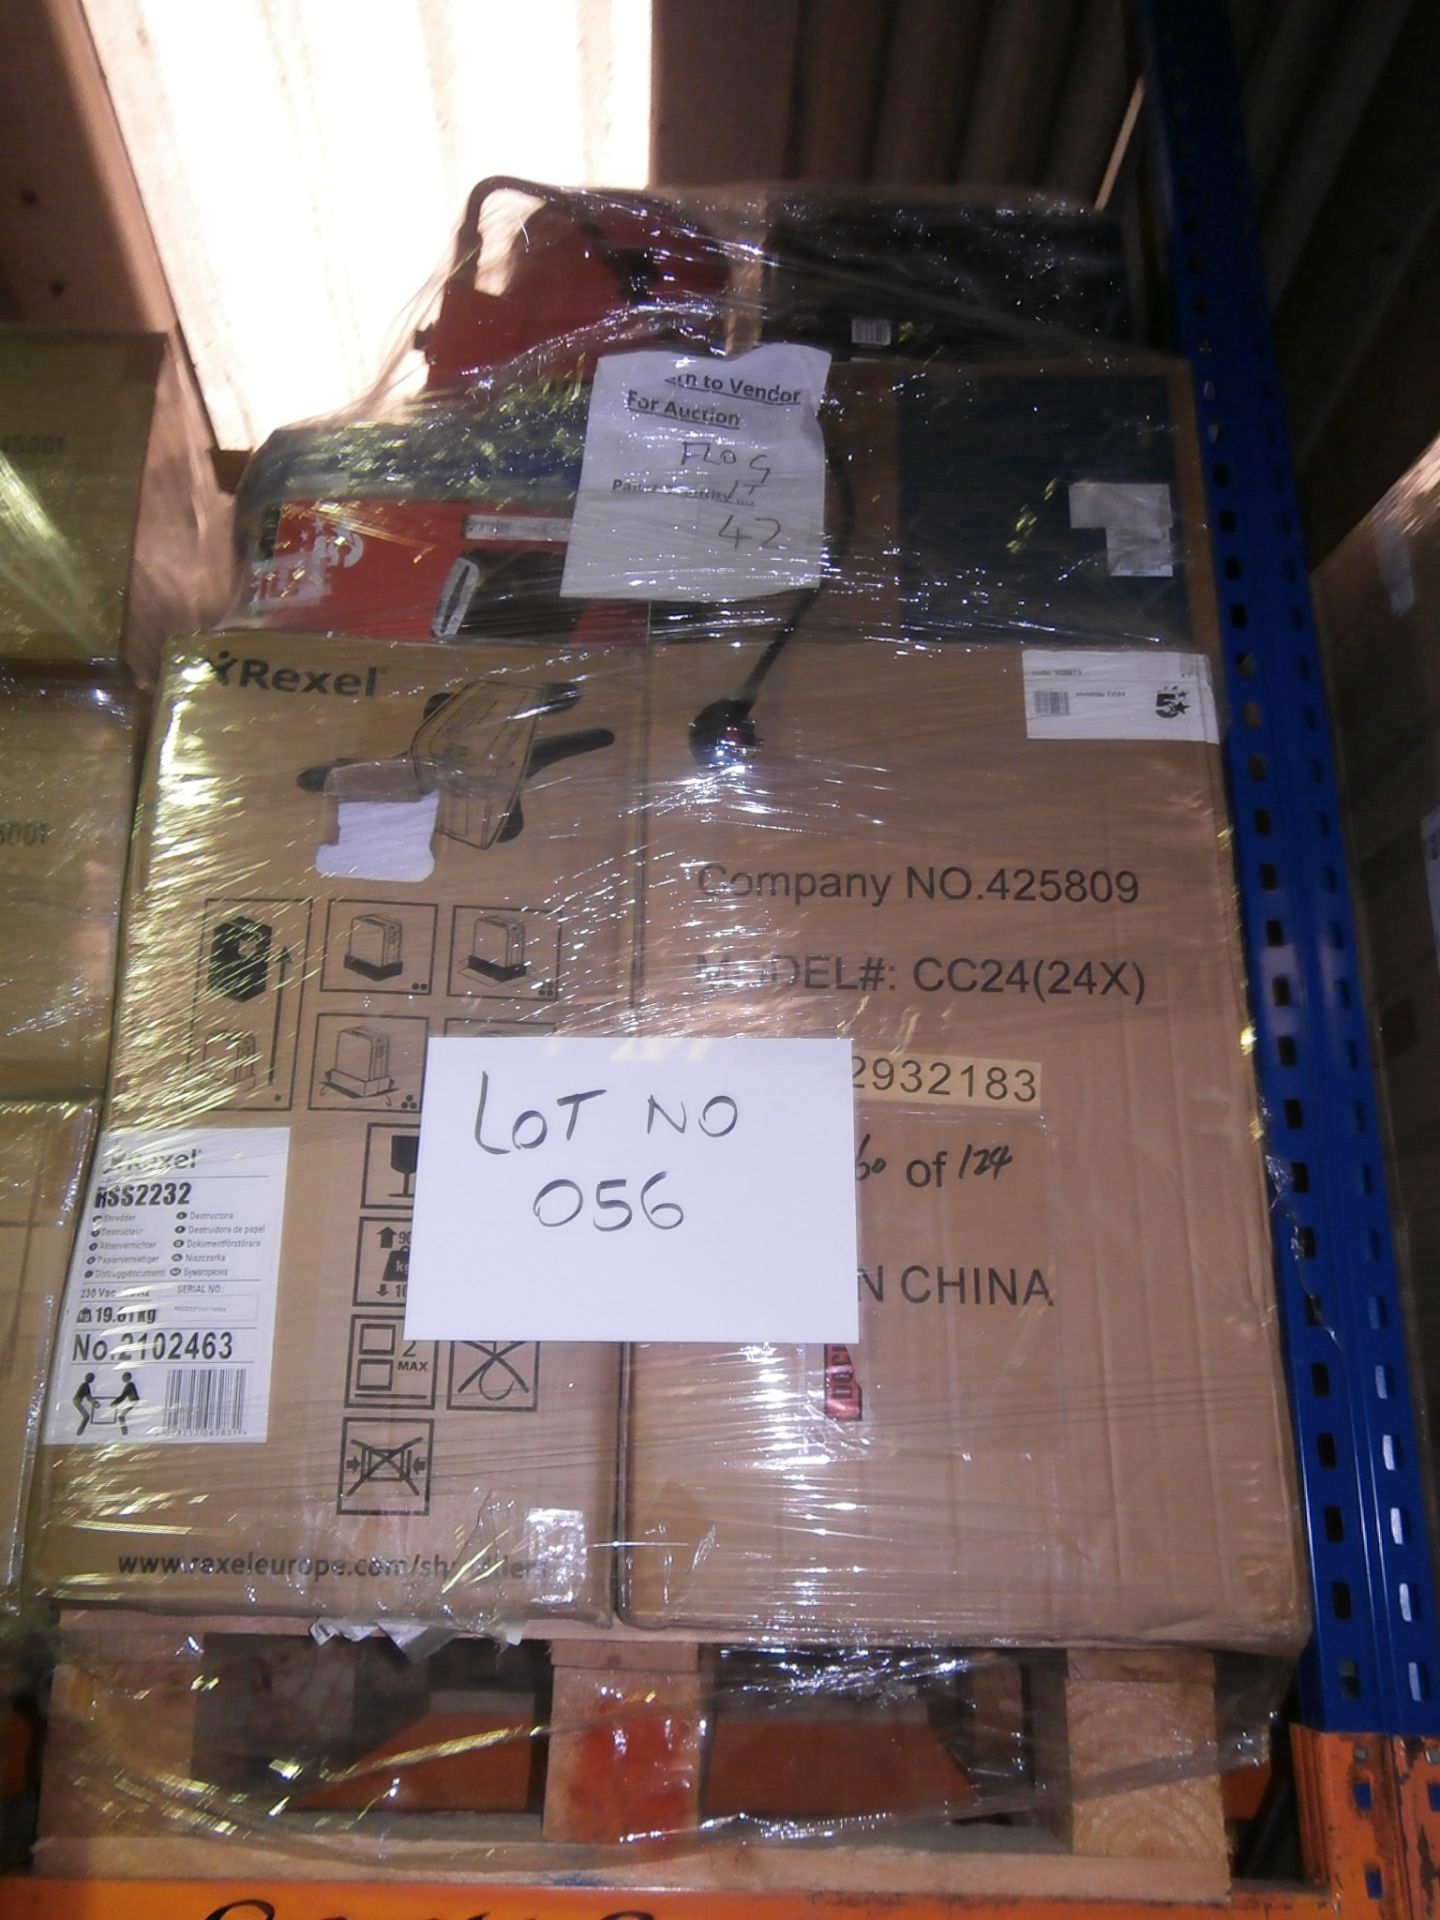 1 x Pallet of Mixed Return Electricals Including Shredders, Fan Heaters. Brother Products and Many